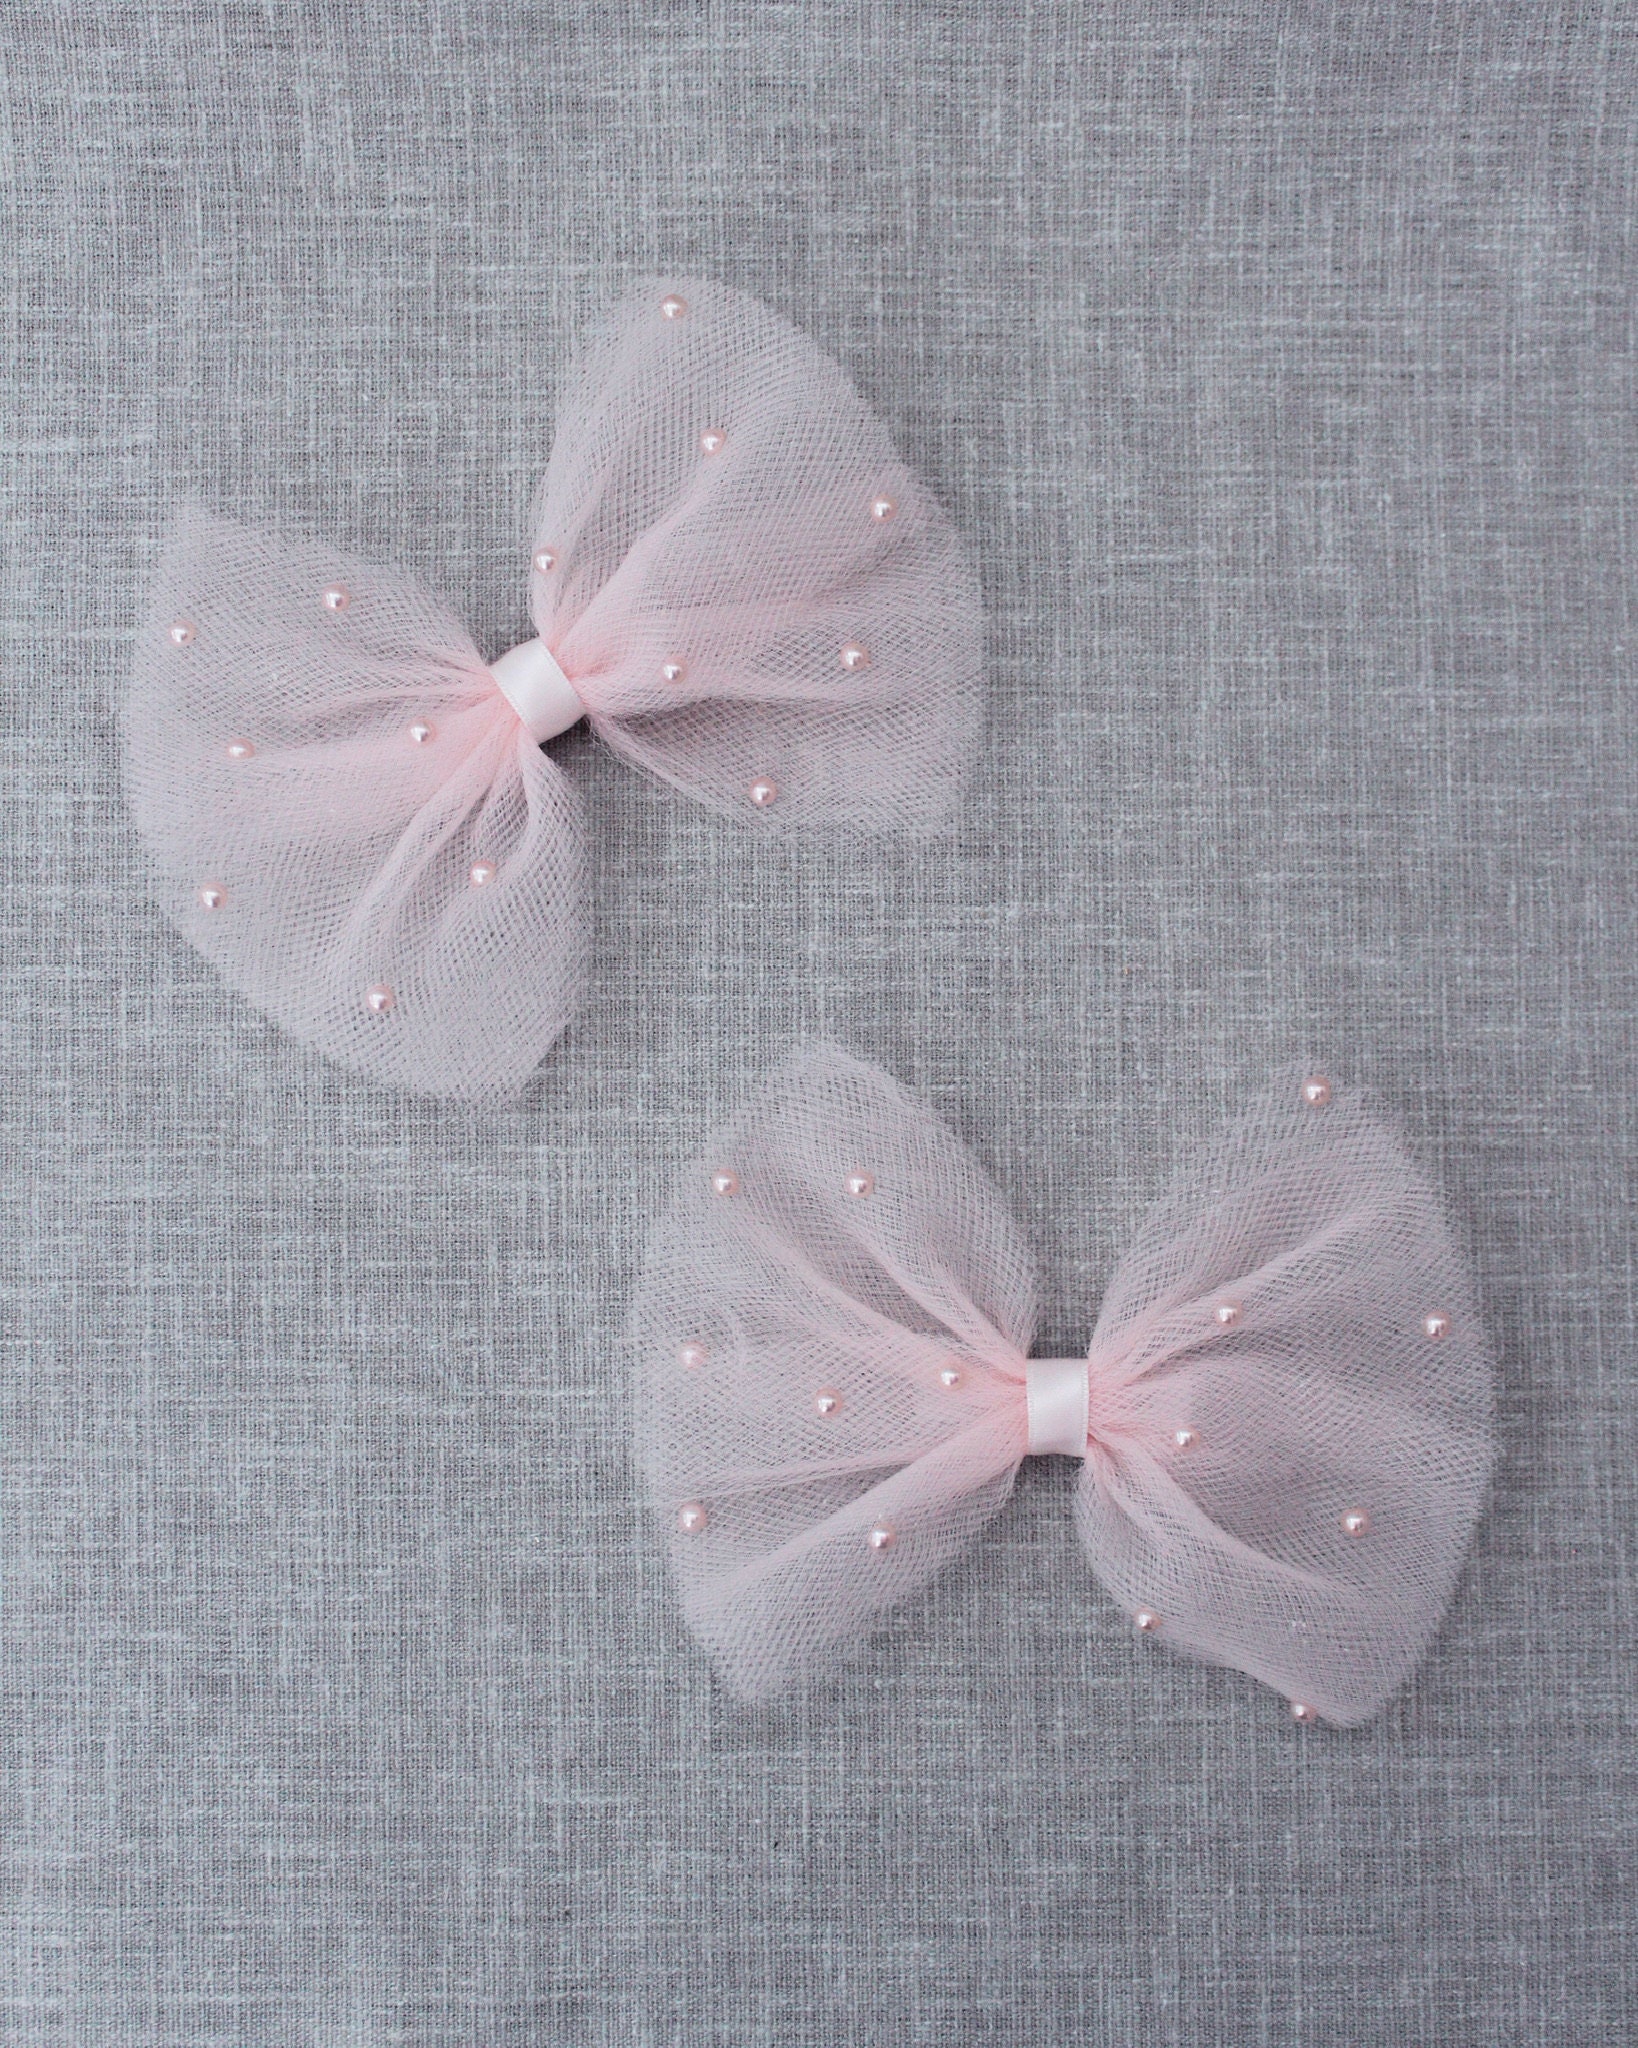 Blush Butterfly Tulle Bow Hair Clip or Shoe Clips with Scattered Pearls -  Girls Hair Accessories, Shoe Clips, Baby Headband